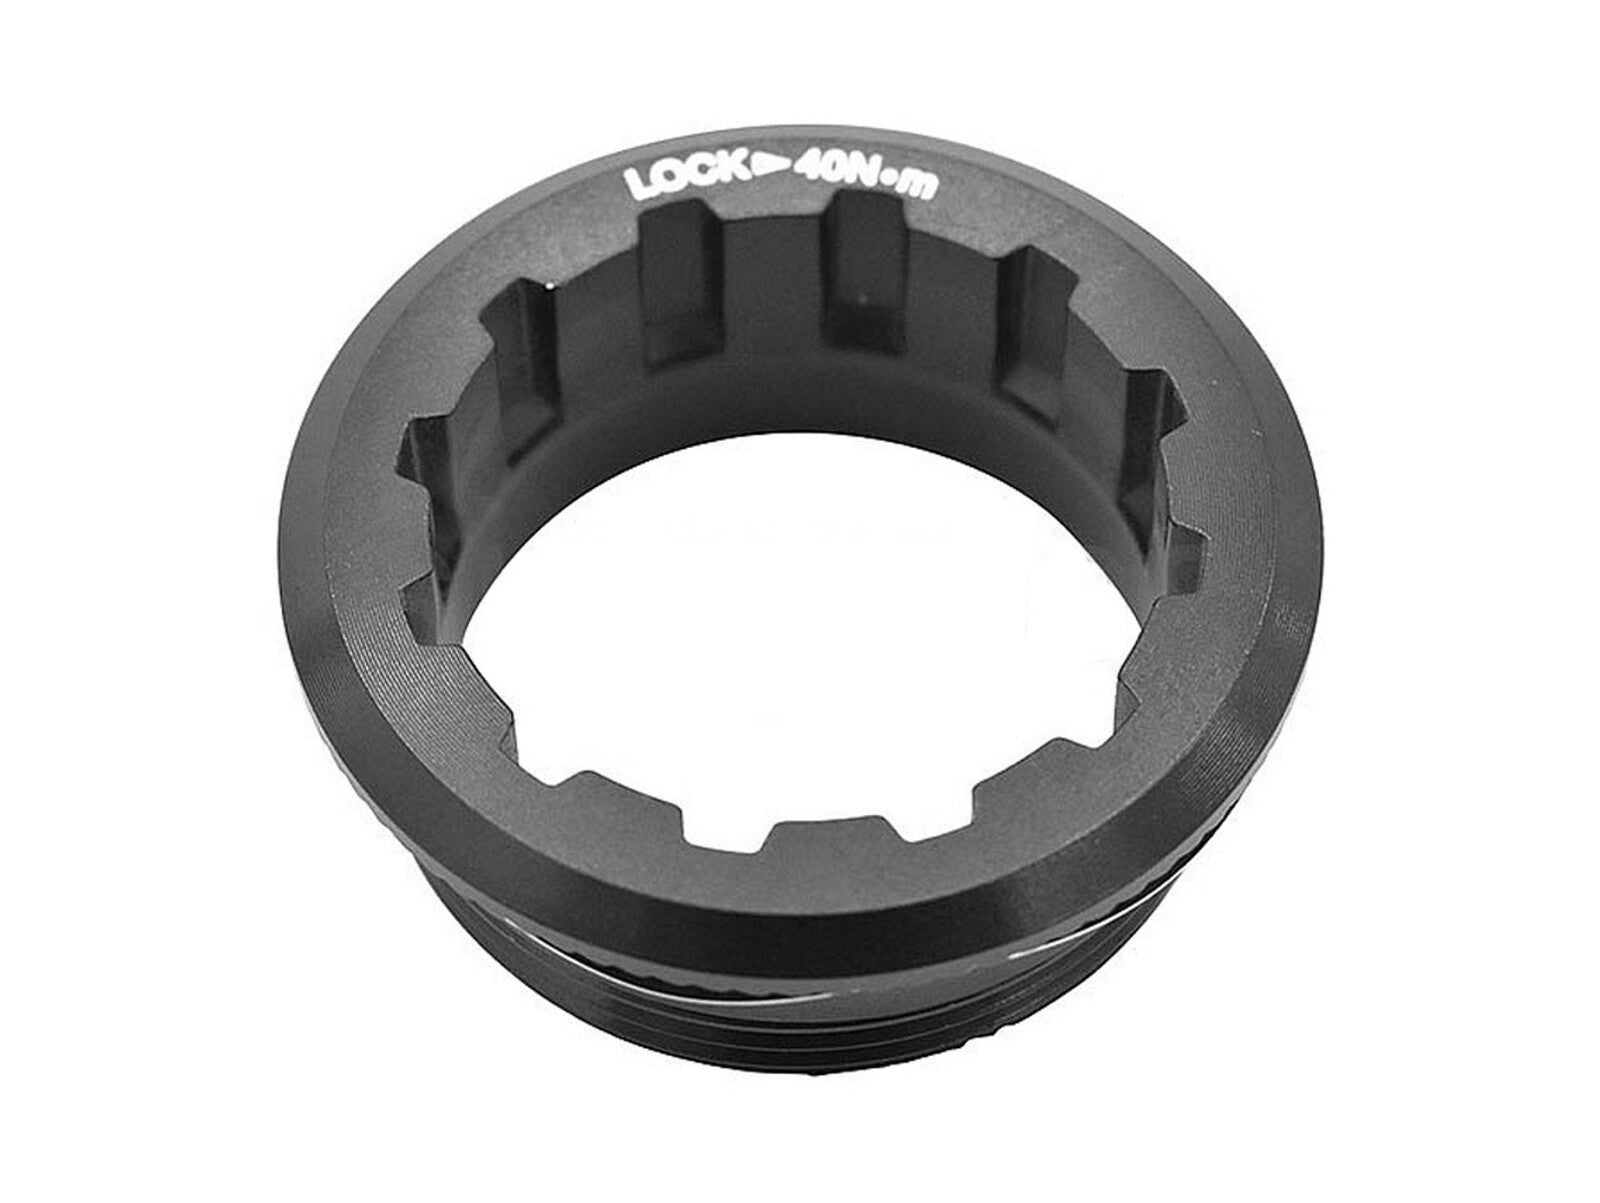 Cassette Lockring & Spacer for CS-M7100 CS-M8100 | Y0GY98010